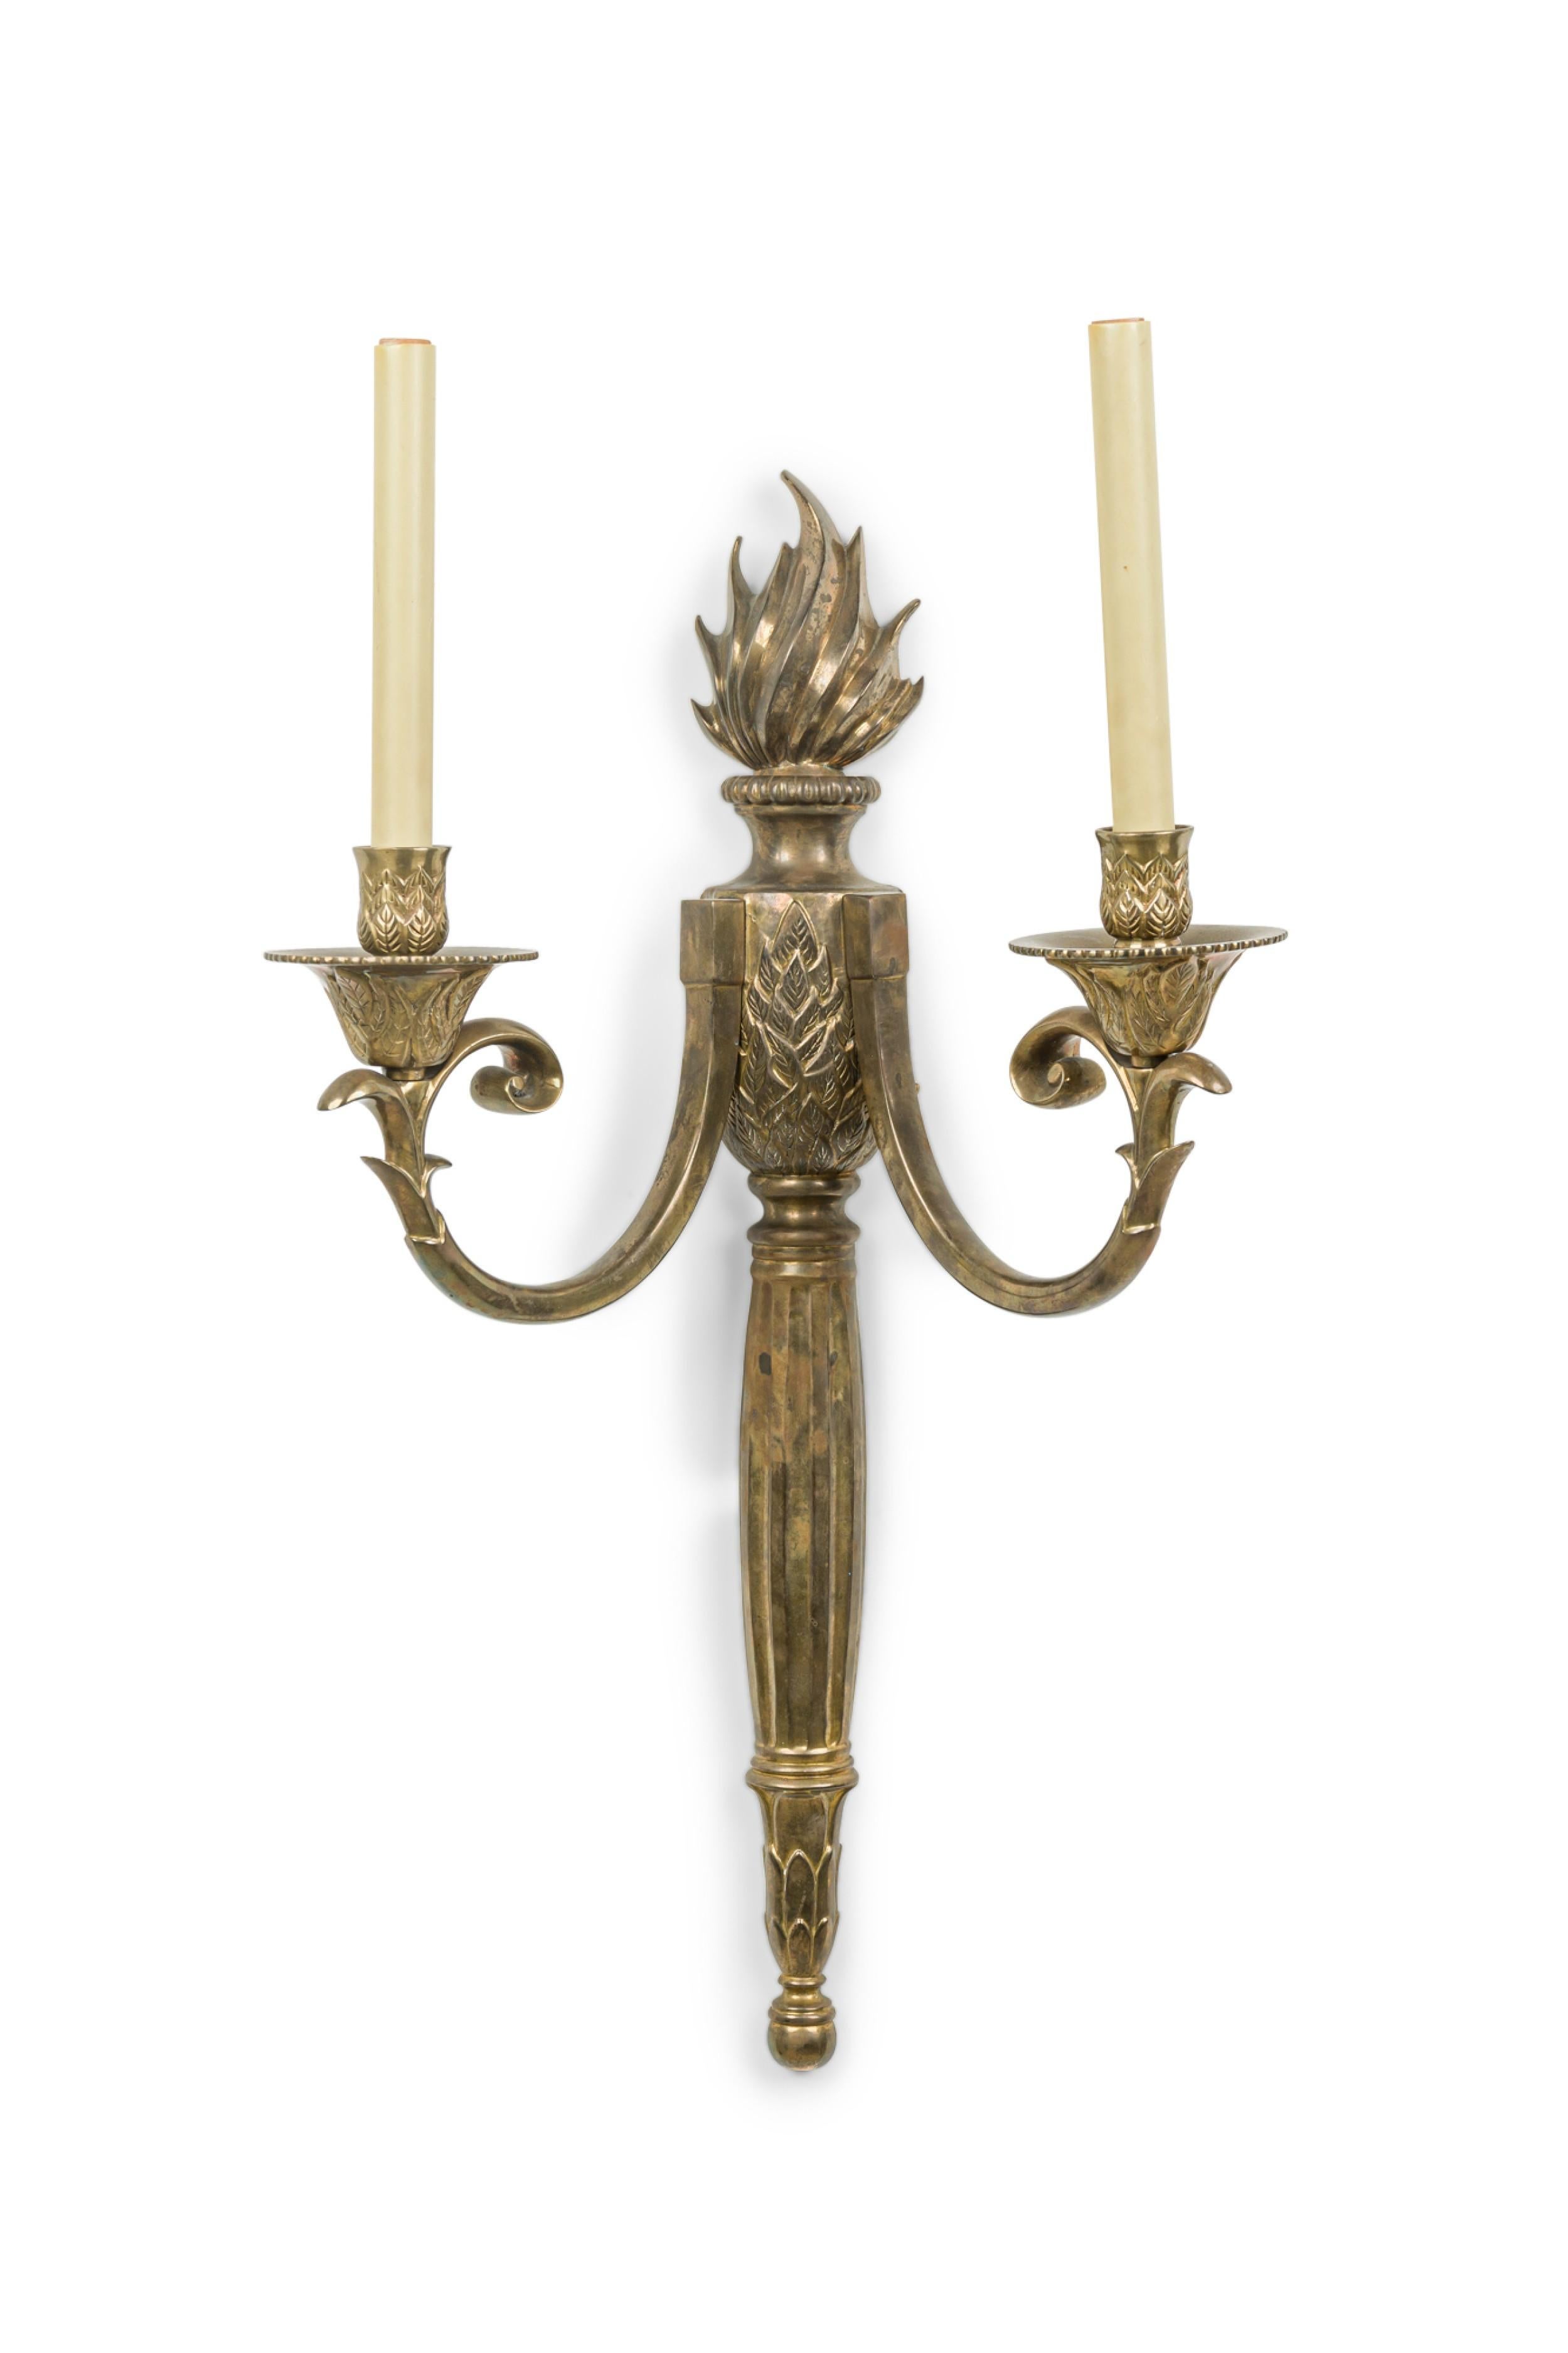 PAIR of French Empire Revival wall sconce with a torch like design having two scroll form arms and flame finial top (PRICED AS PAIR )
